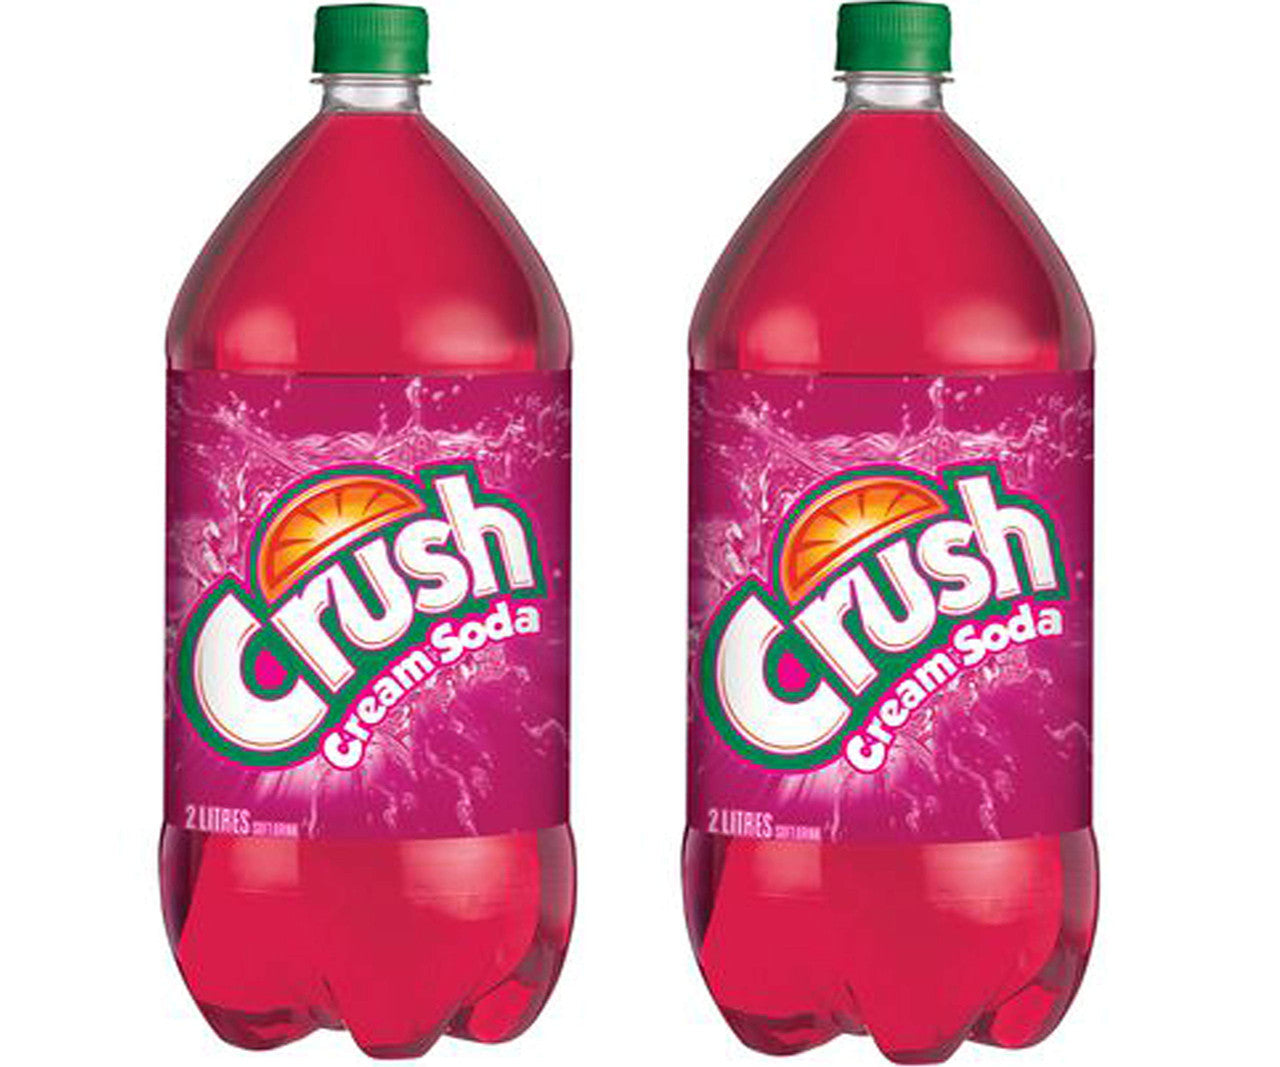 Crush Cream Soda Soft Drink 2 Bottles, 2 Litres / 67.6 Fluid Ounces each {Imported from Canada}